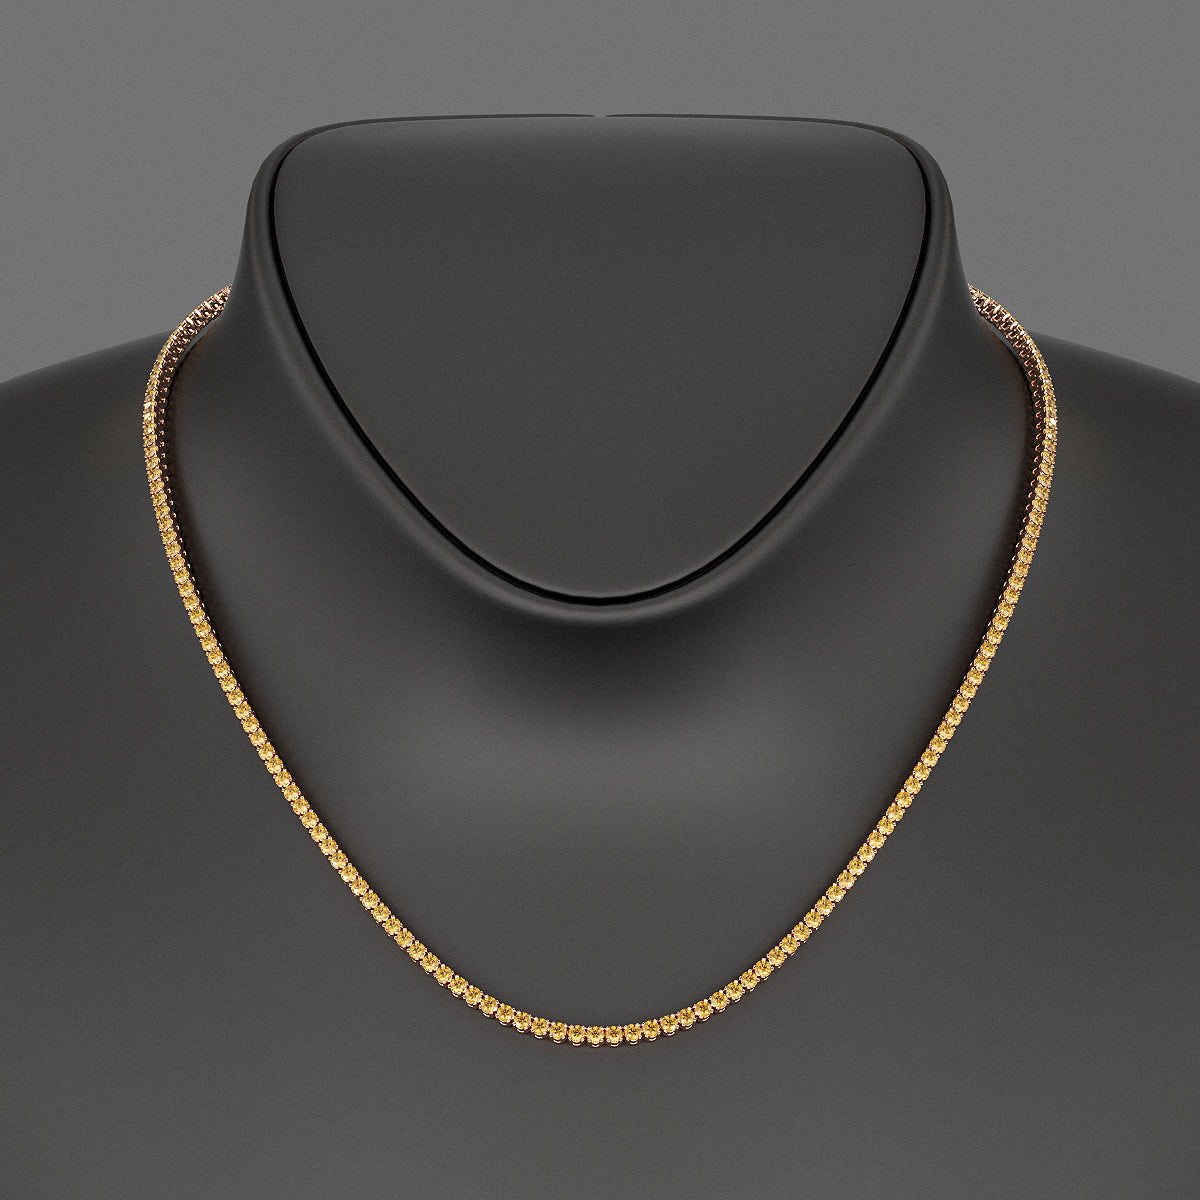 Yellow Sapphire Tennis Necklace in 14K/18K Yellow Gold